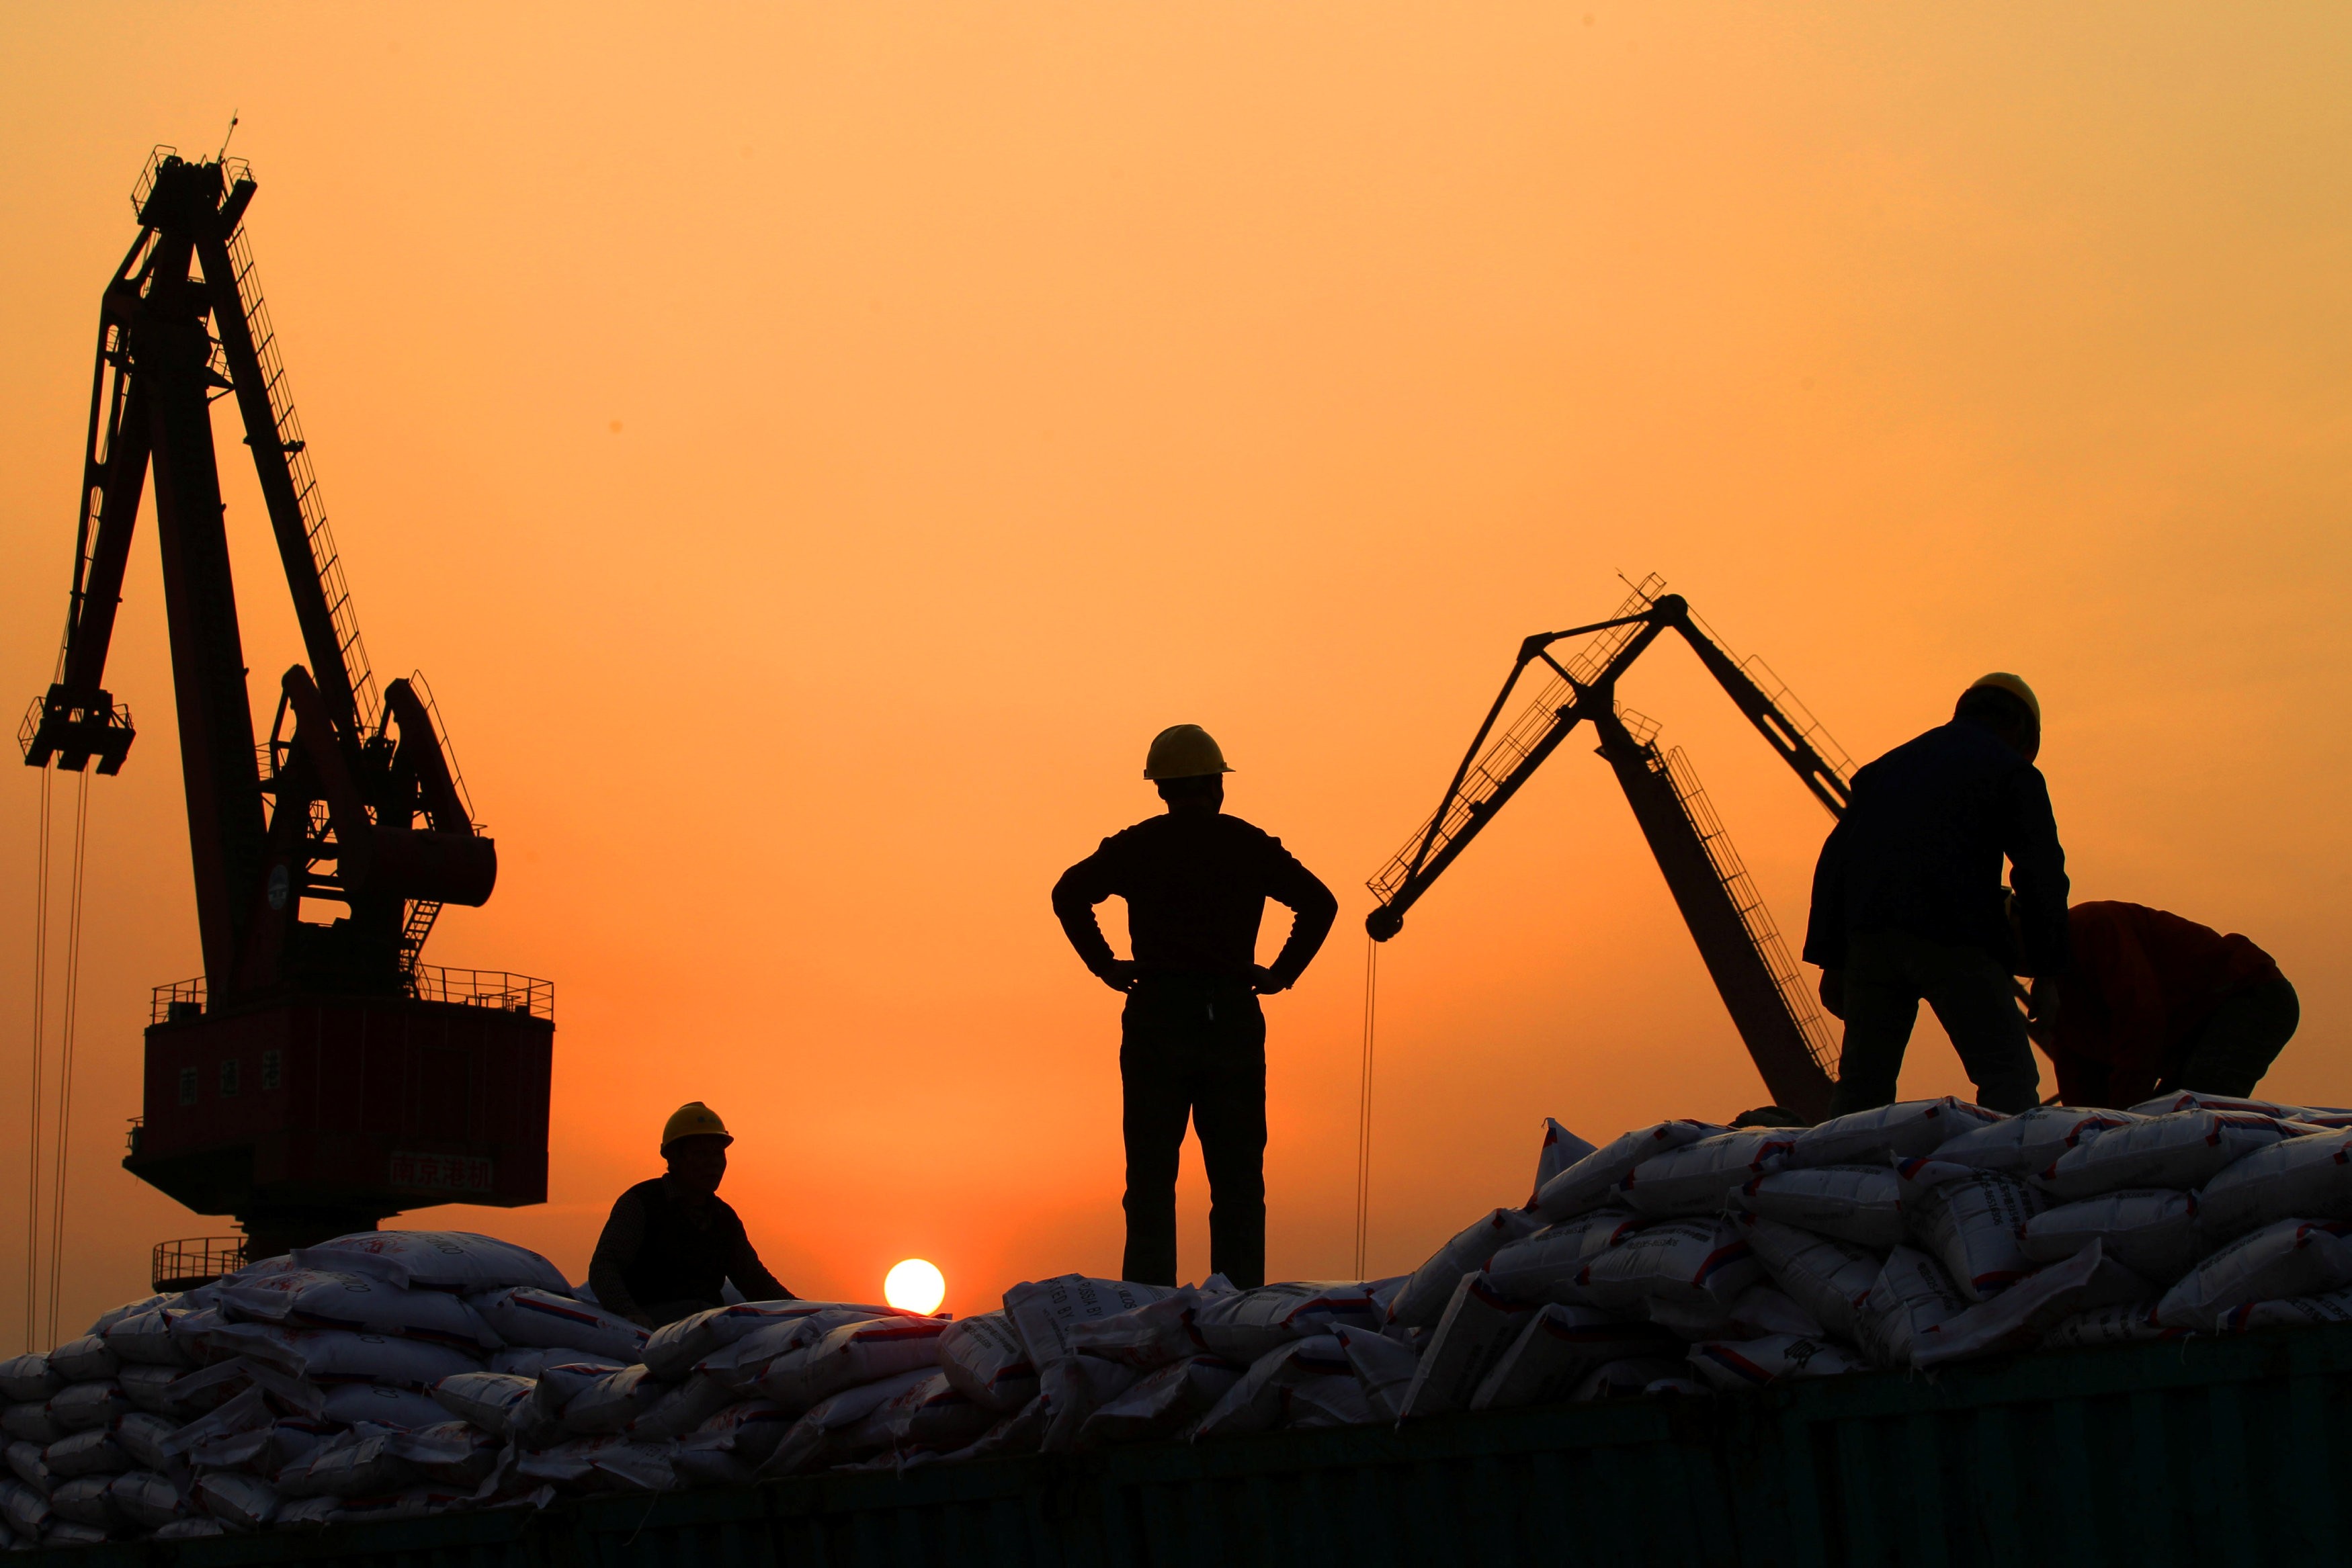 Workers load imported goods at a port in Nantong, Jiangsu province, China. Ambitious businesses and leaders in the region are busy formulating strategic plans to be involved in the ‘Belt and Road Initiative’, which will involve people in more than 70 countries around the world.